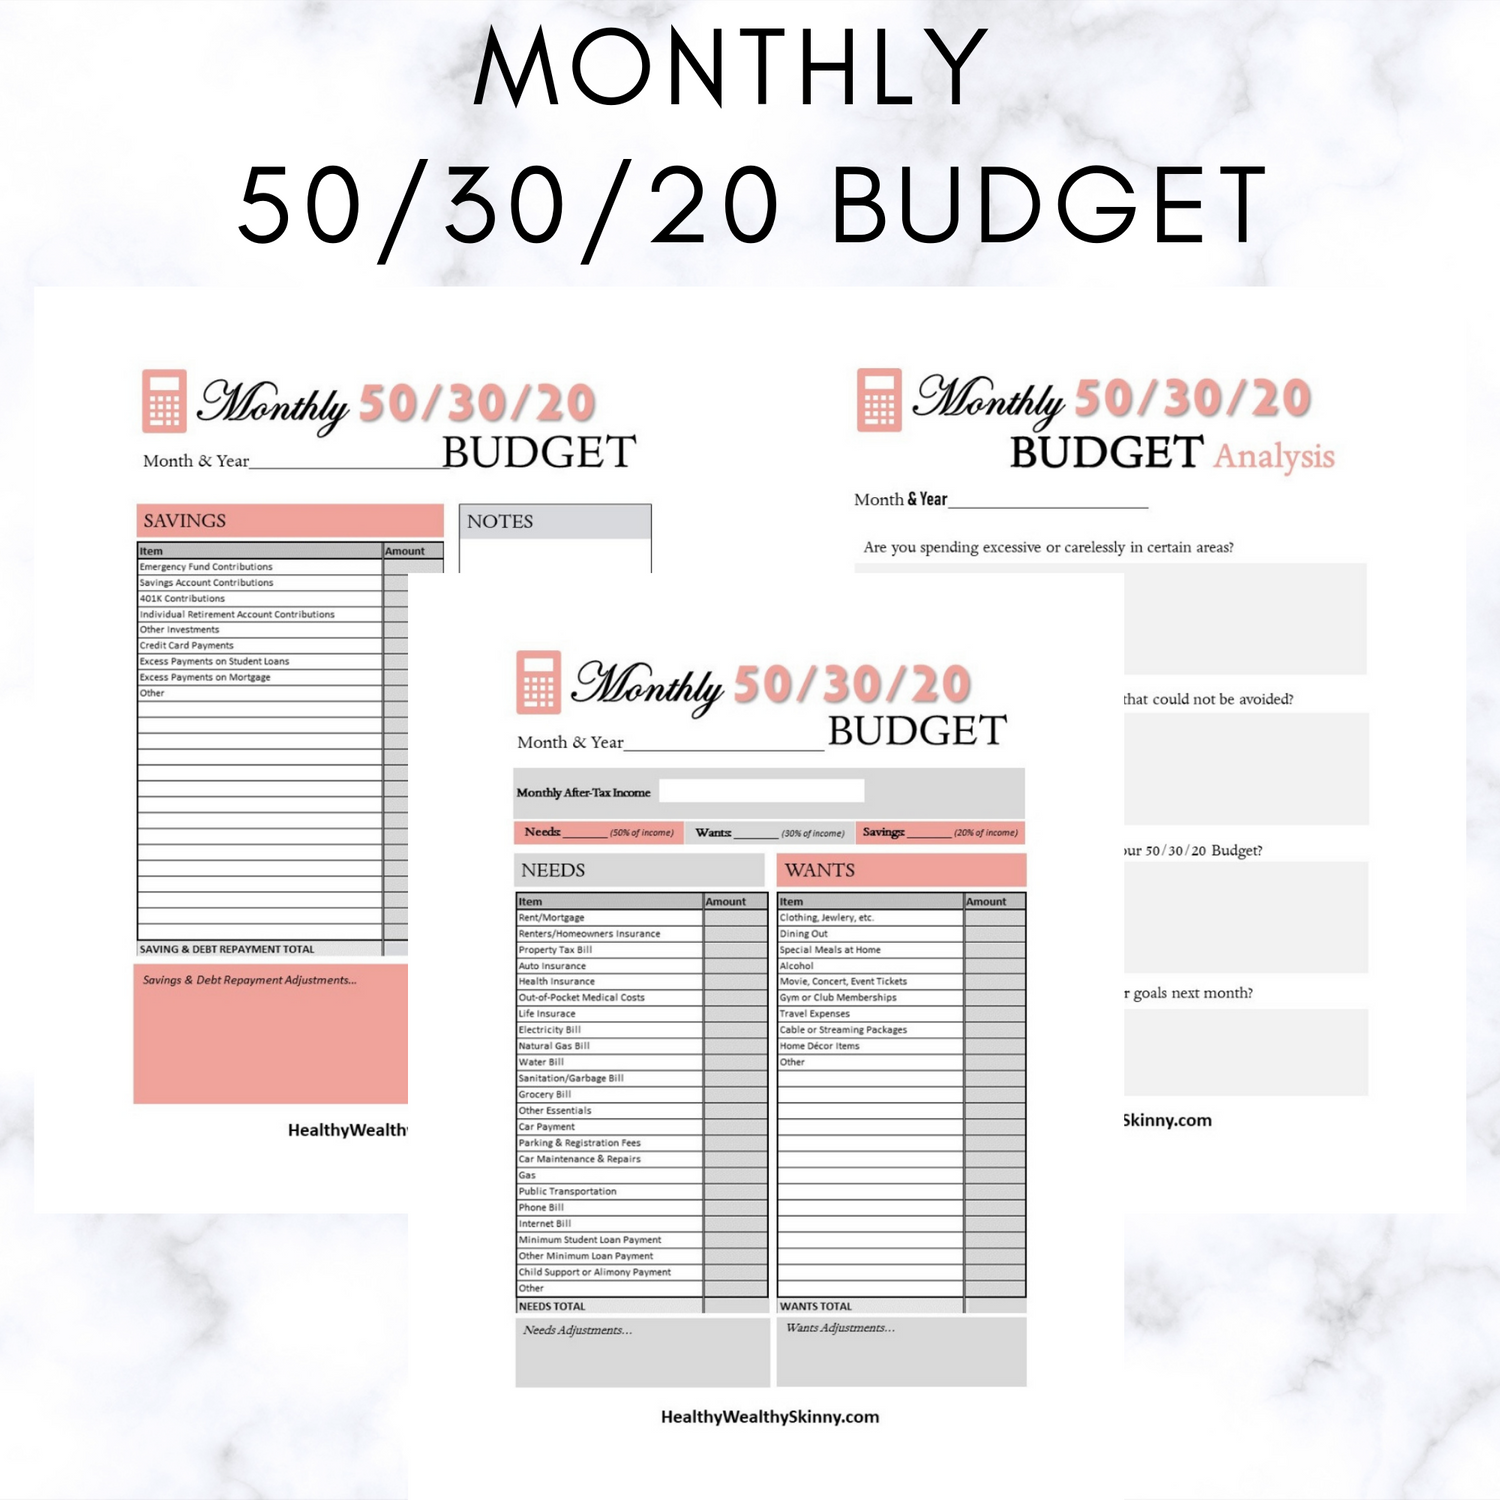 Monthly 50/30/20 Budget Worksheet PDF (Available In Various Colors) - Healthy Wealthy Skinny